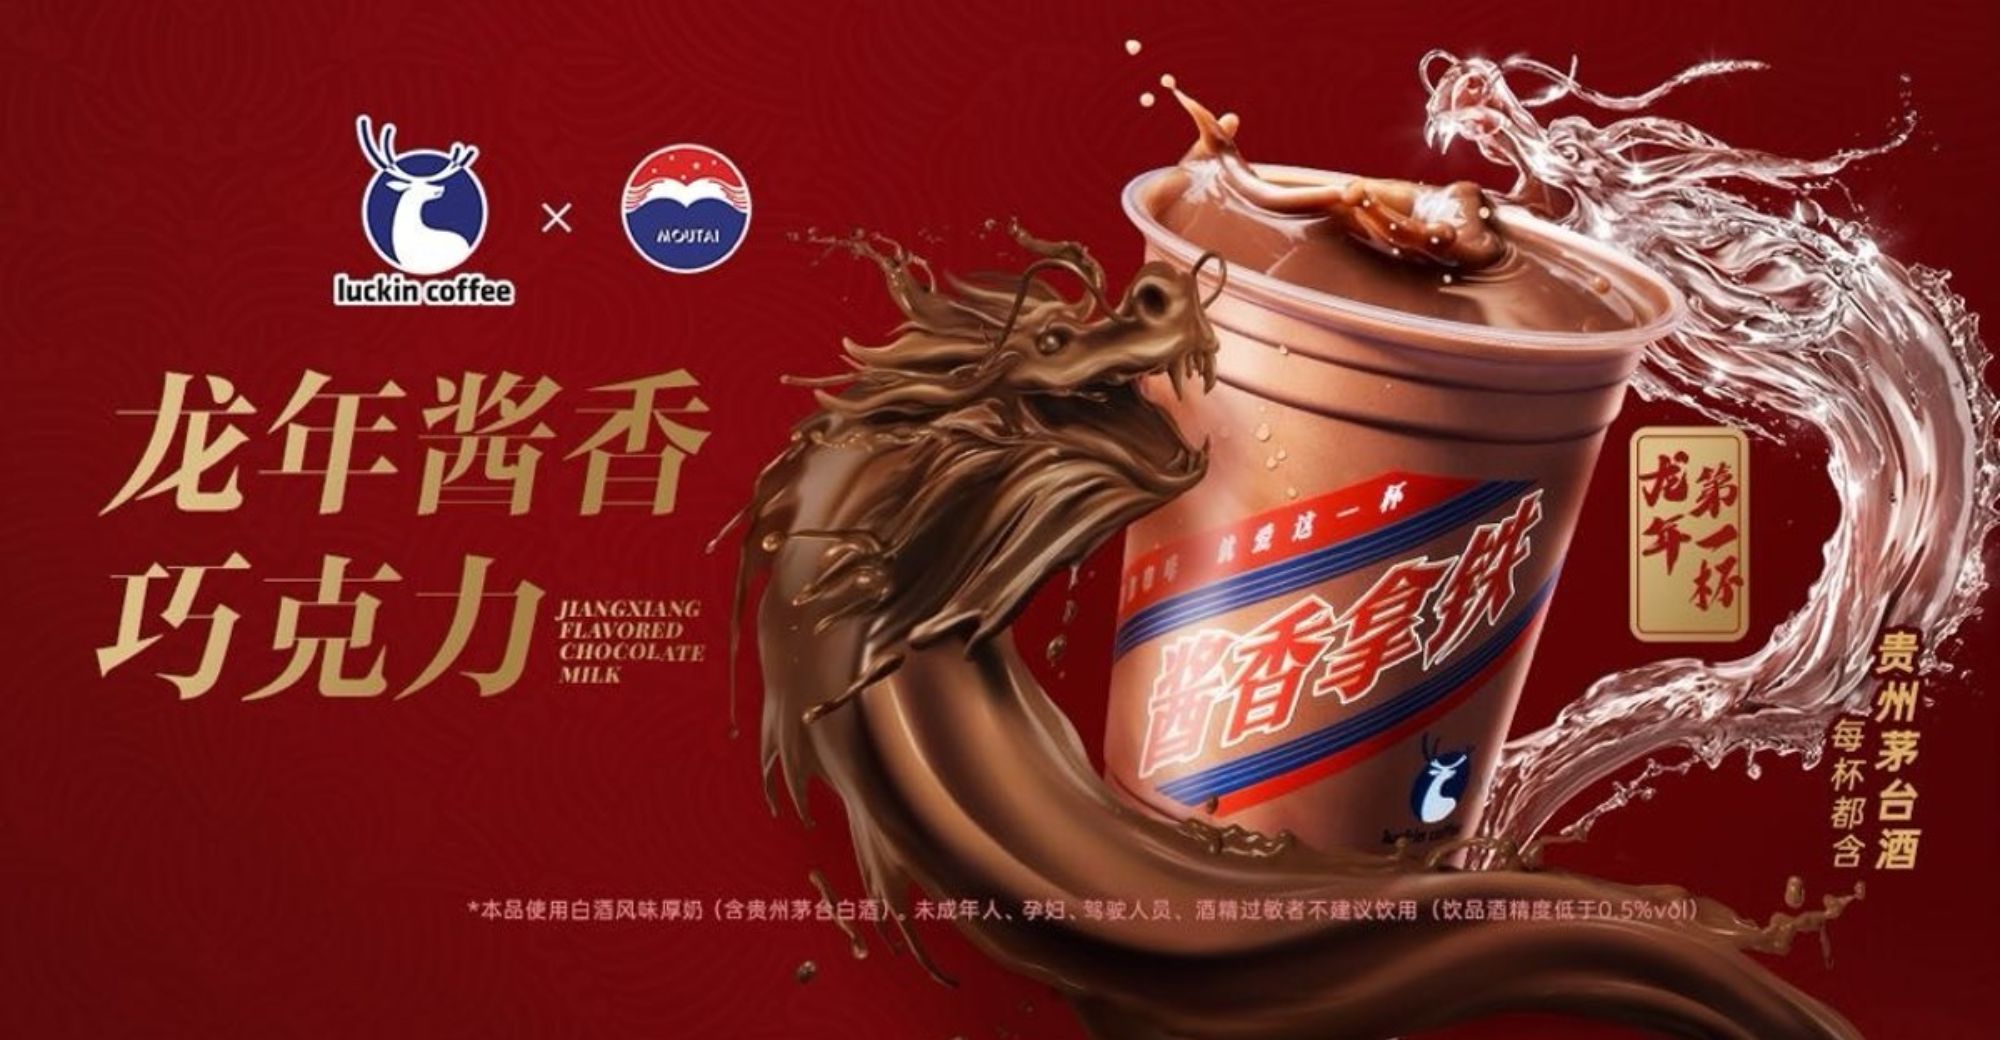 Luckin Coffee and Moutai Jointly Launch the “Dragon Year Sauce Fragrance Chocolate”